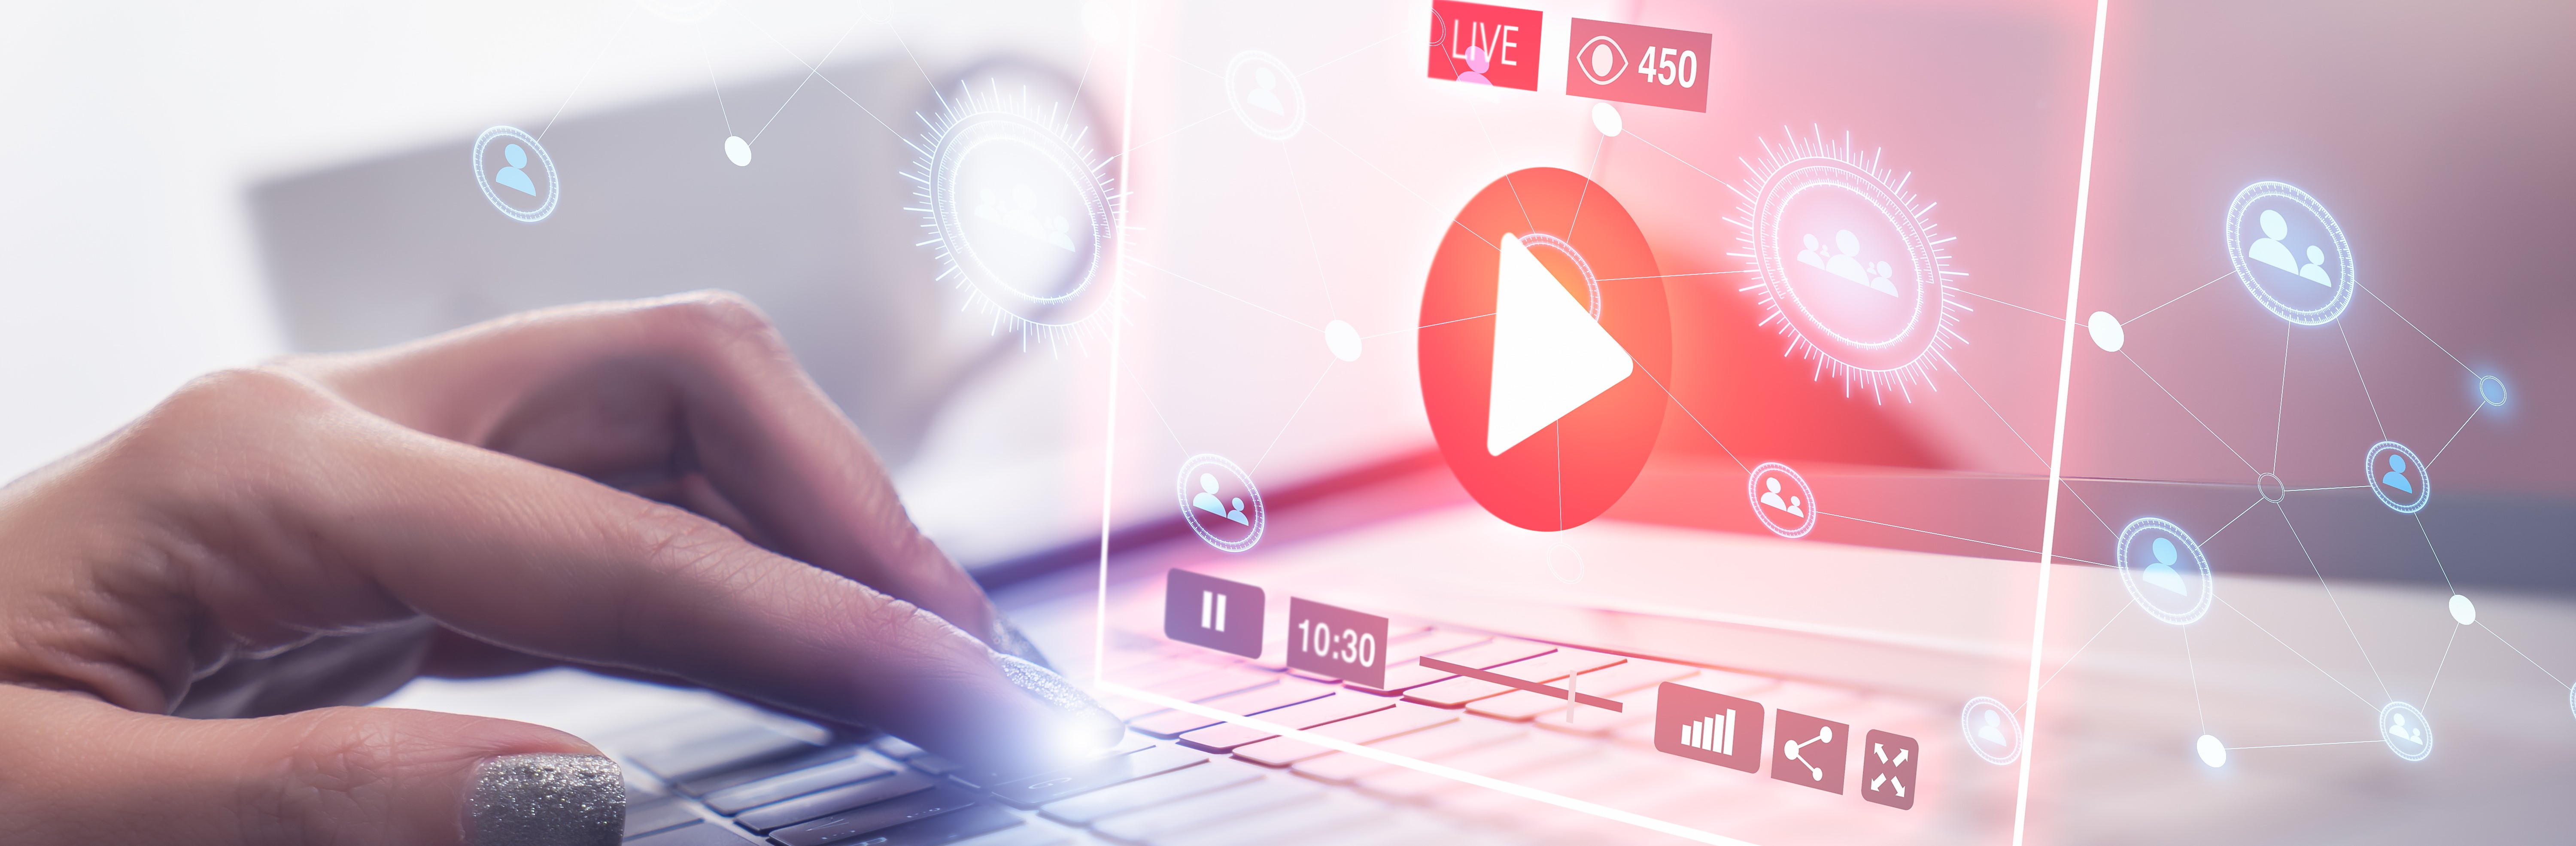 Video and live streaming marketing strategies 